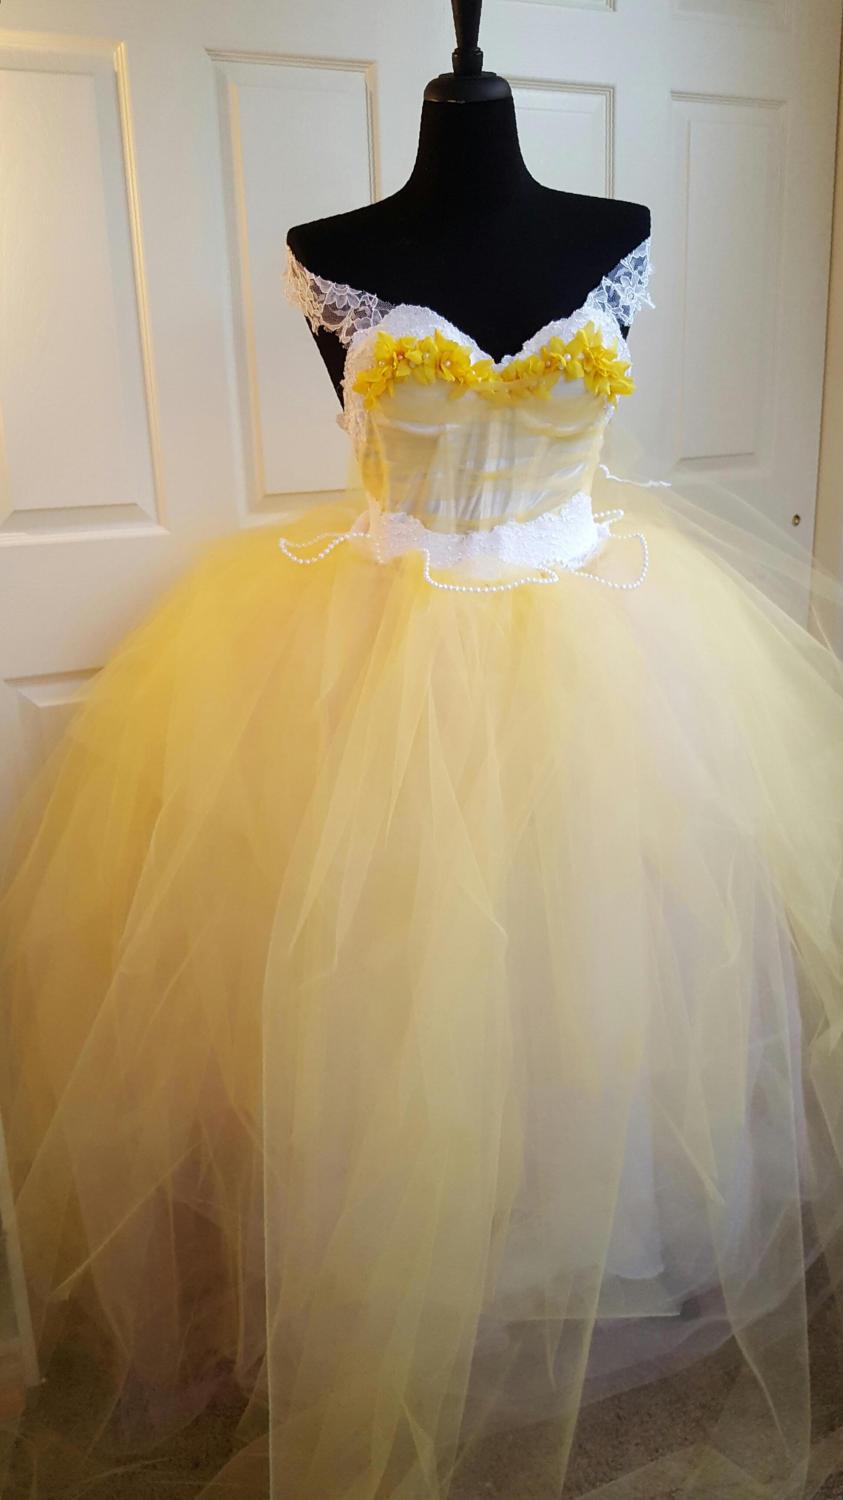 Hochzeit - Belle Beauty and the Beast Style Yellow White Fairytale Princess Corset w/Straps Lace Tulle Wedding Bridal Ballgown Costume Quinceanera Prom